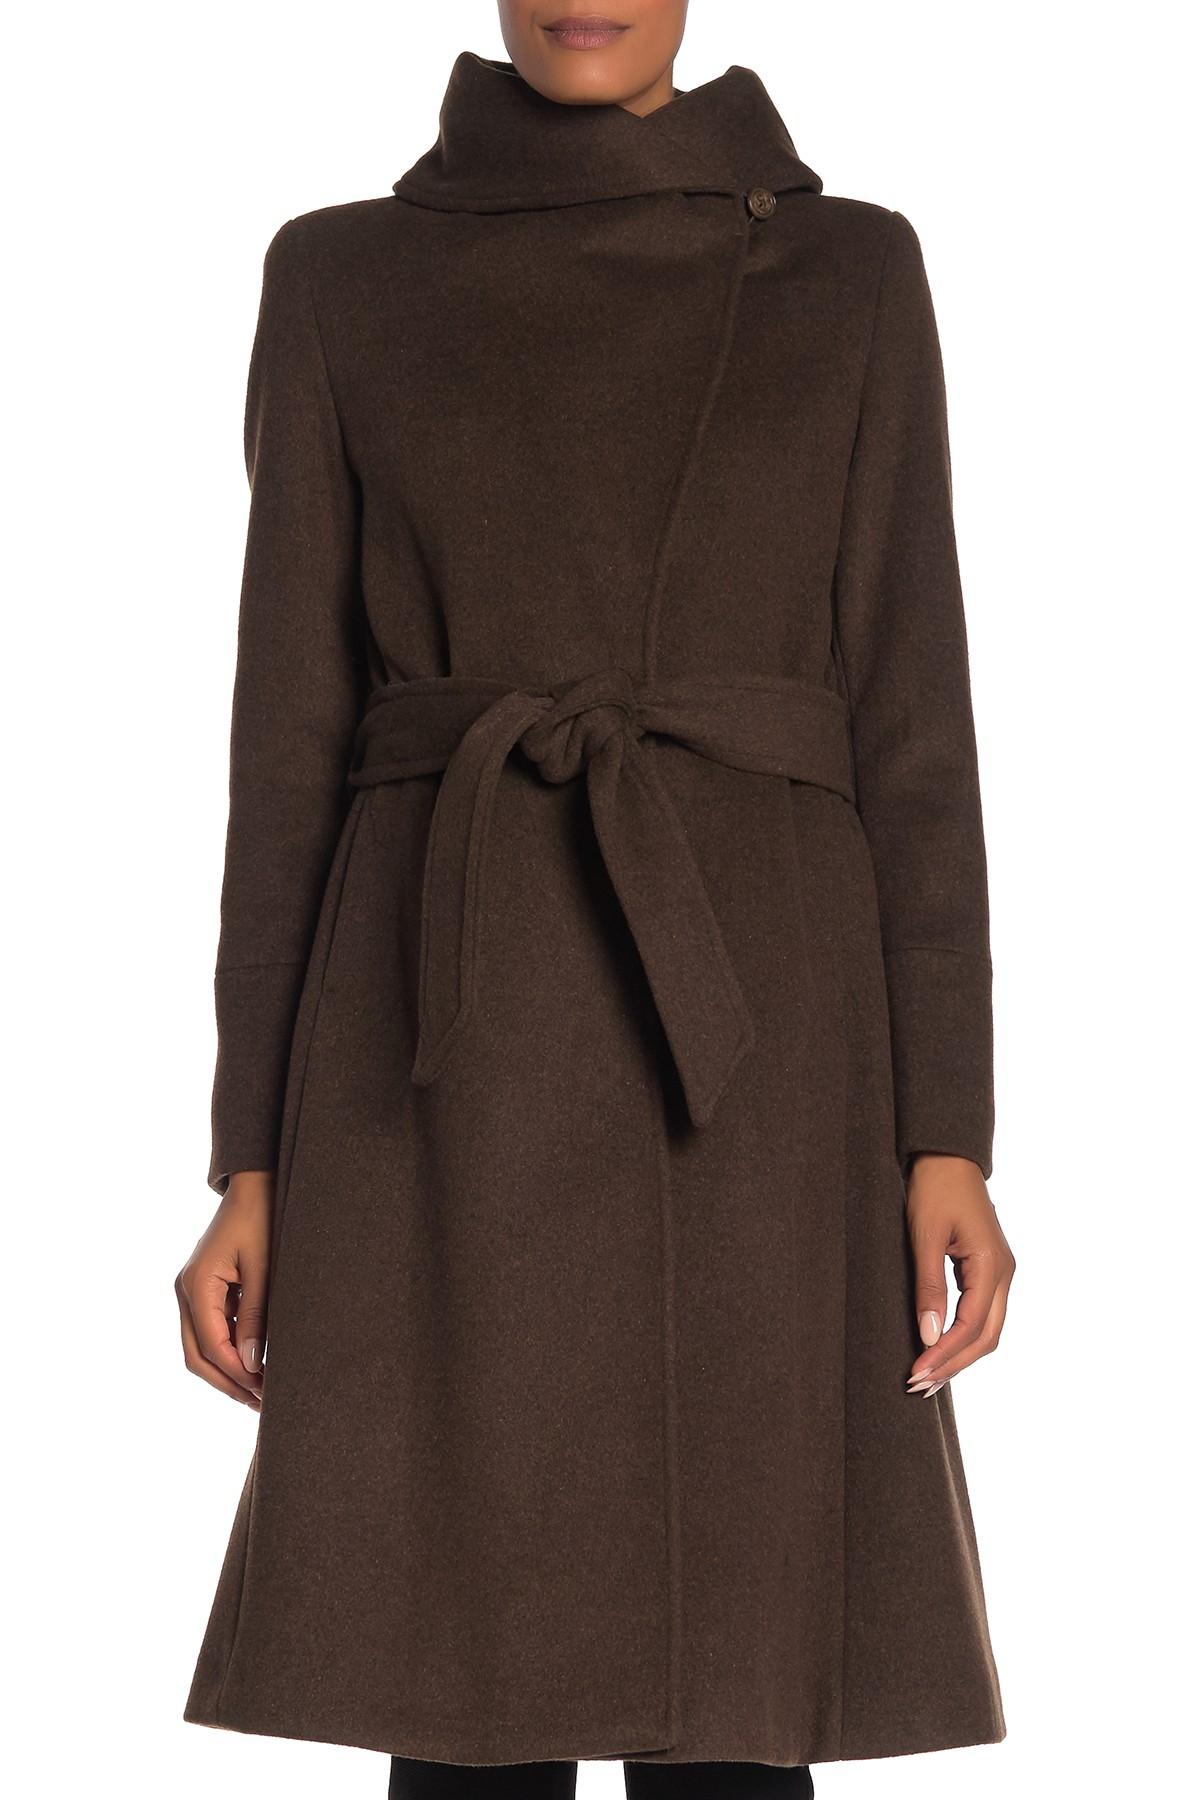 Cole Haan Wool Blend Shawl Collar Belted Coat in Brown - Lyst